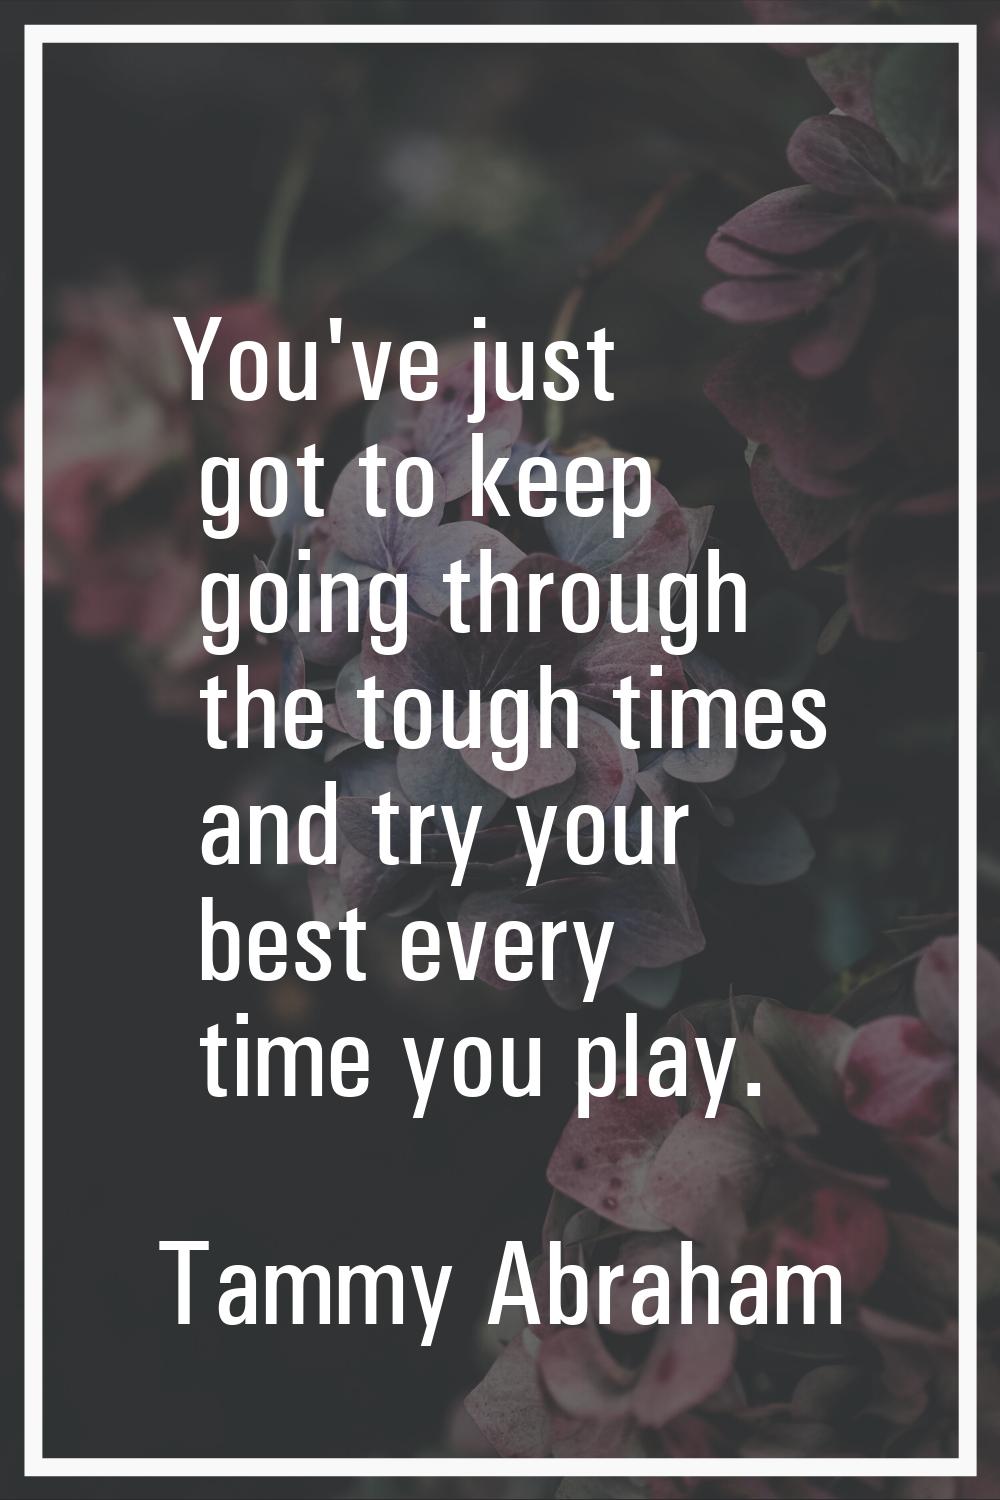 You've just got to keep going through the tough times and try your best every time you play.